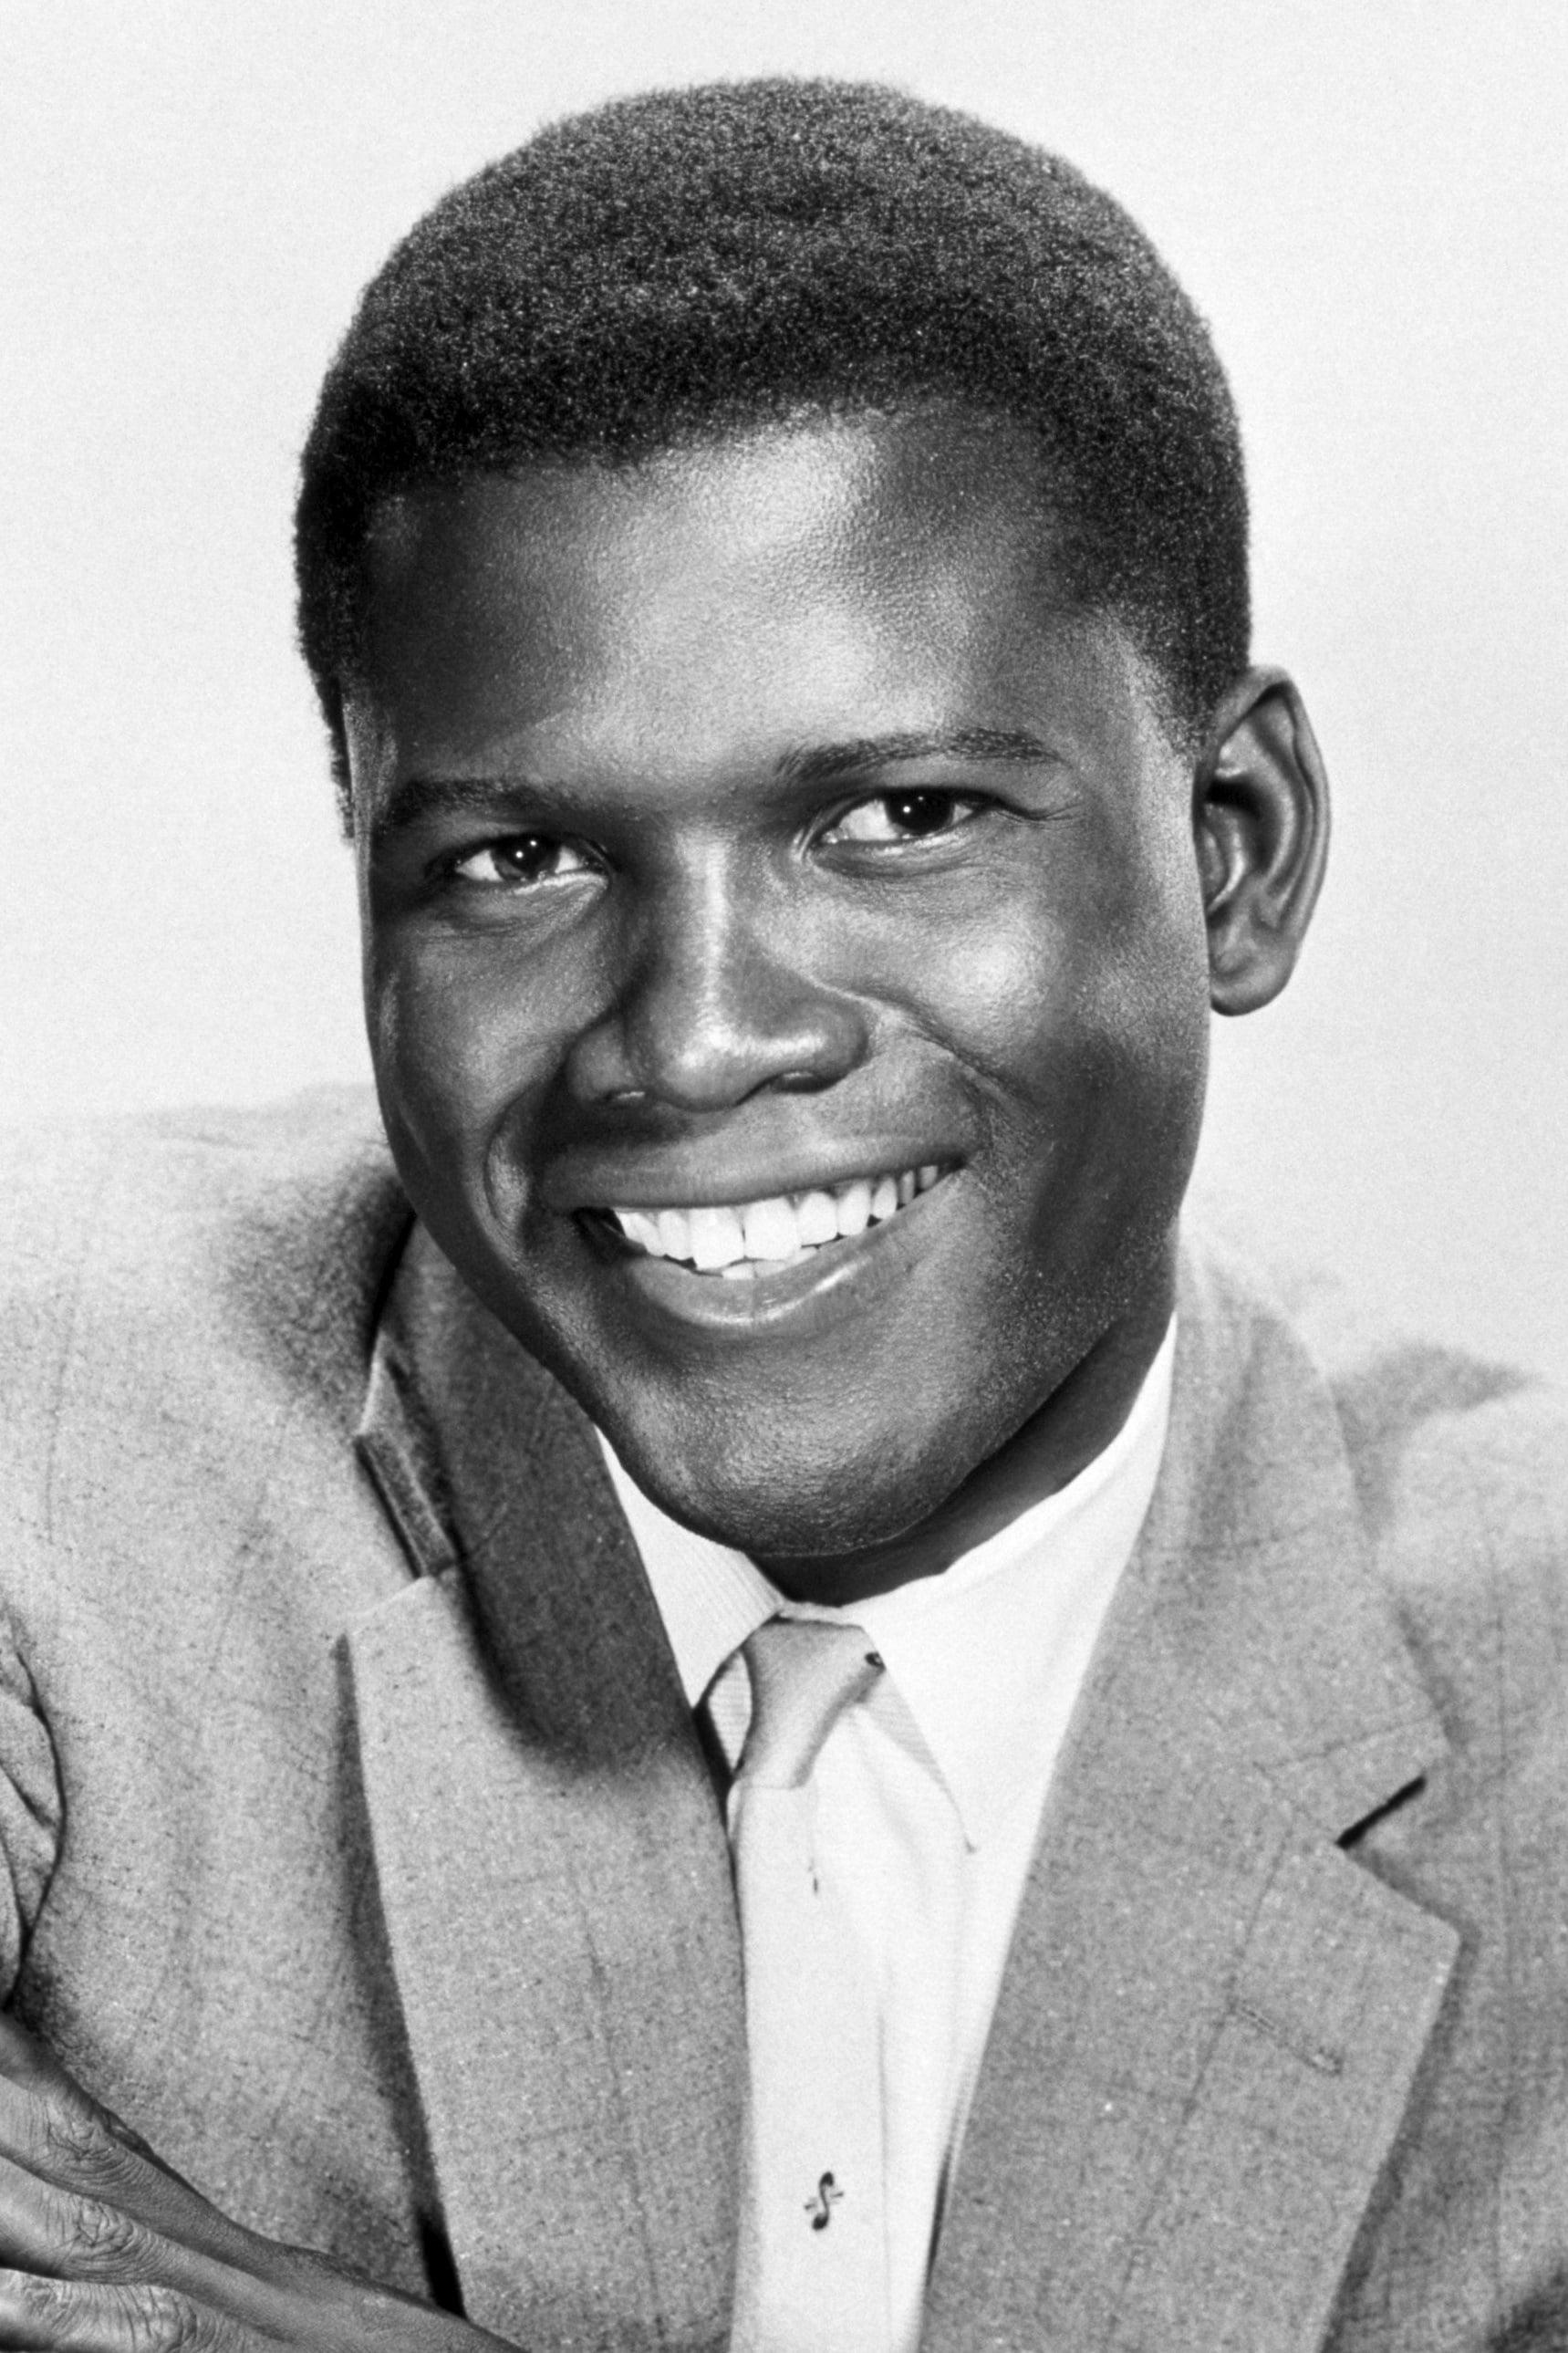 Sidney Poitier poster